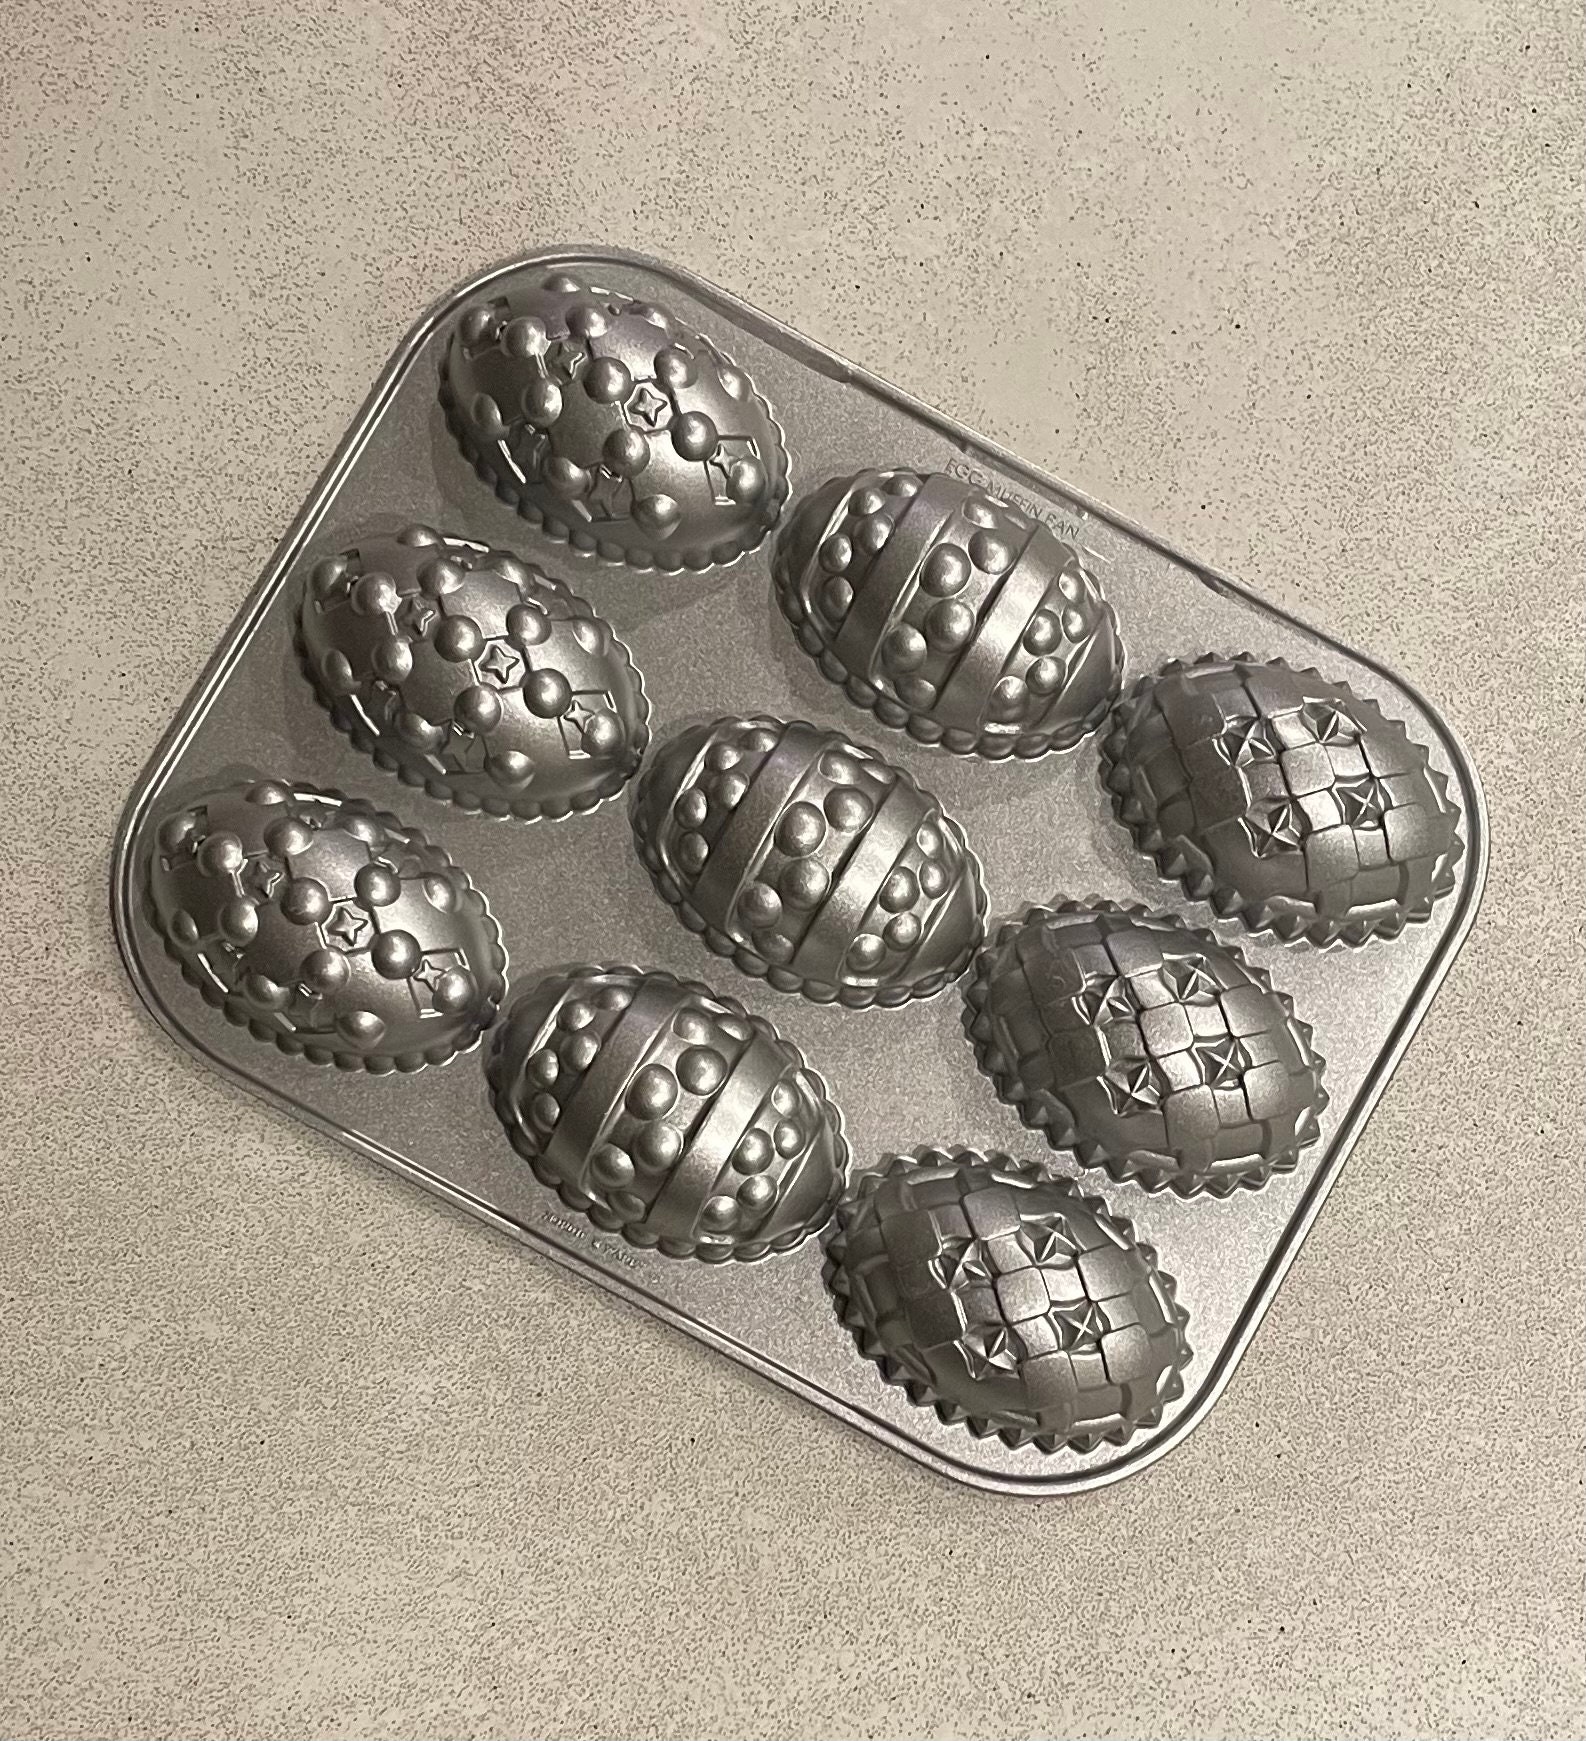 Nordic Ware Egg Muffin Pan Metal 9 Muffins Baking Easter Holiday Heavy Mold  - Muffin & Pastry Pans, Facebook Marketplace